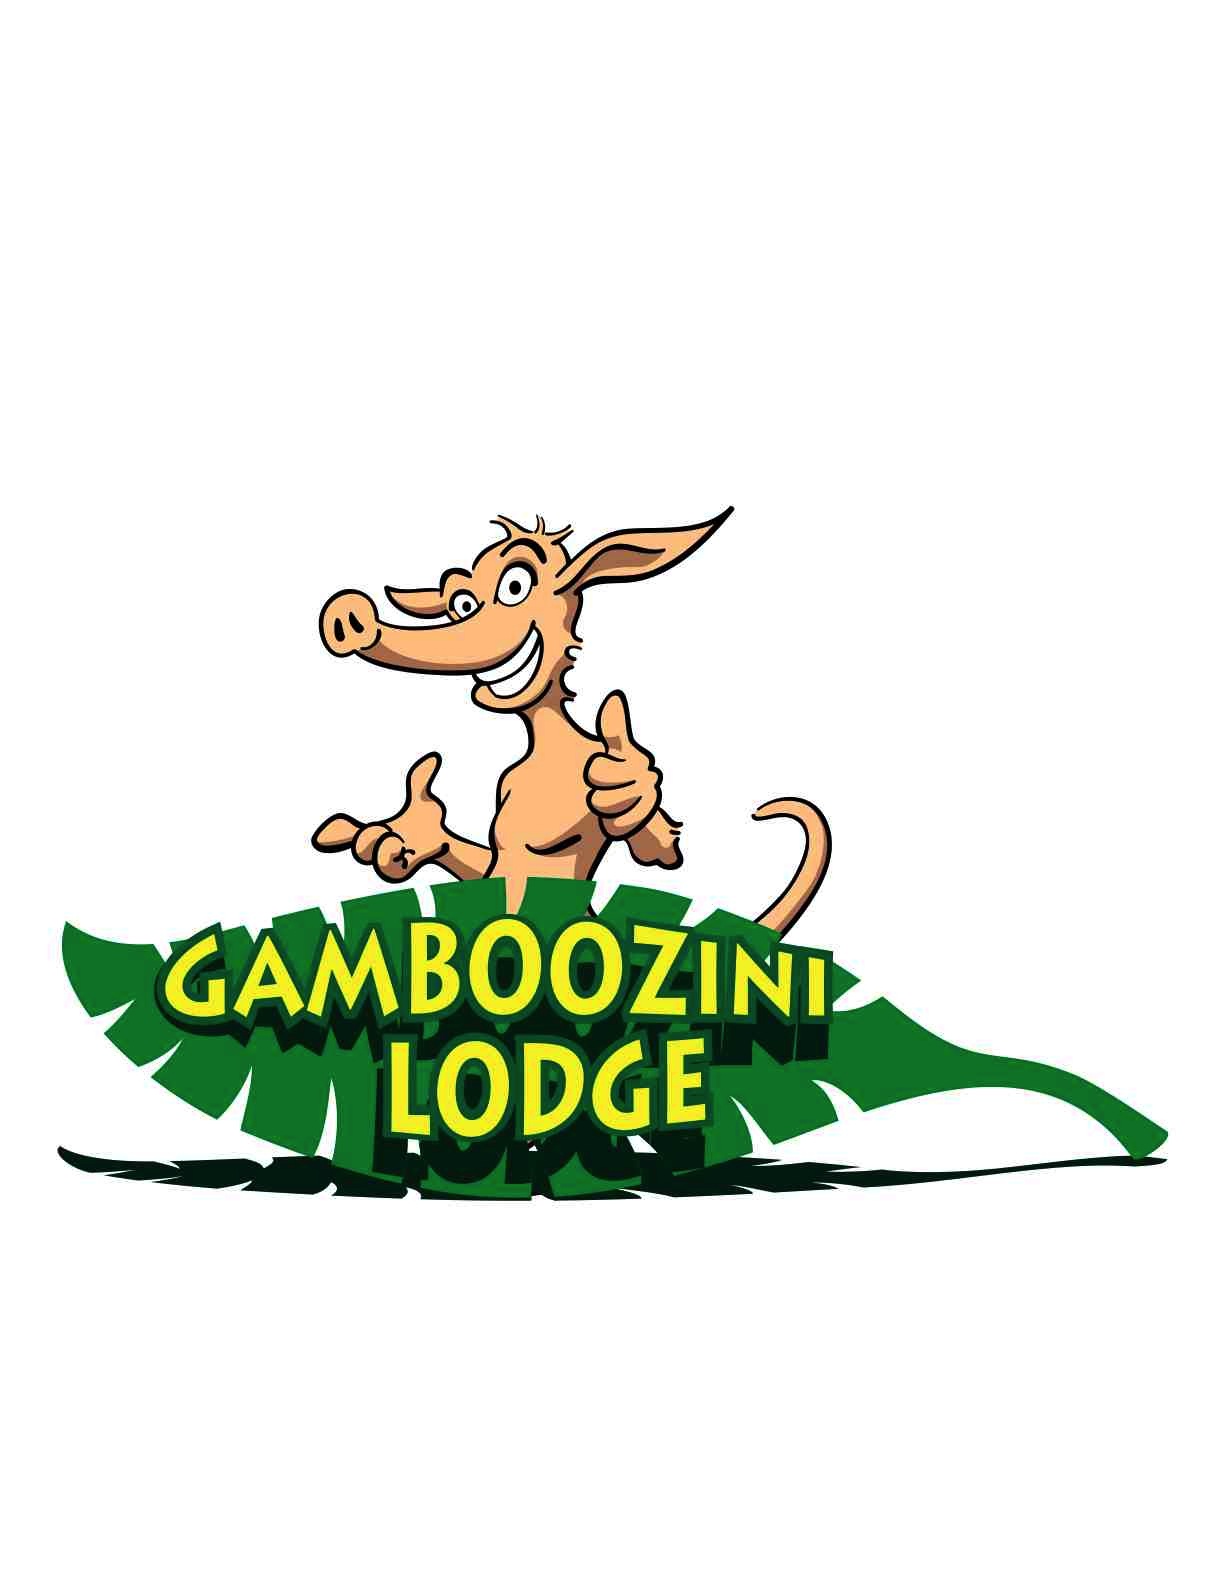 Mozambique Lodge Hotel Hostel backpackers budget Ponta Do Ouro B&B accommodation